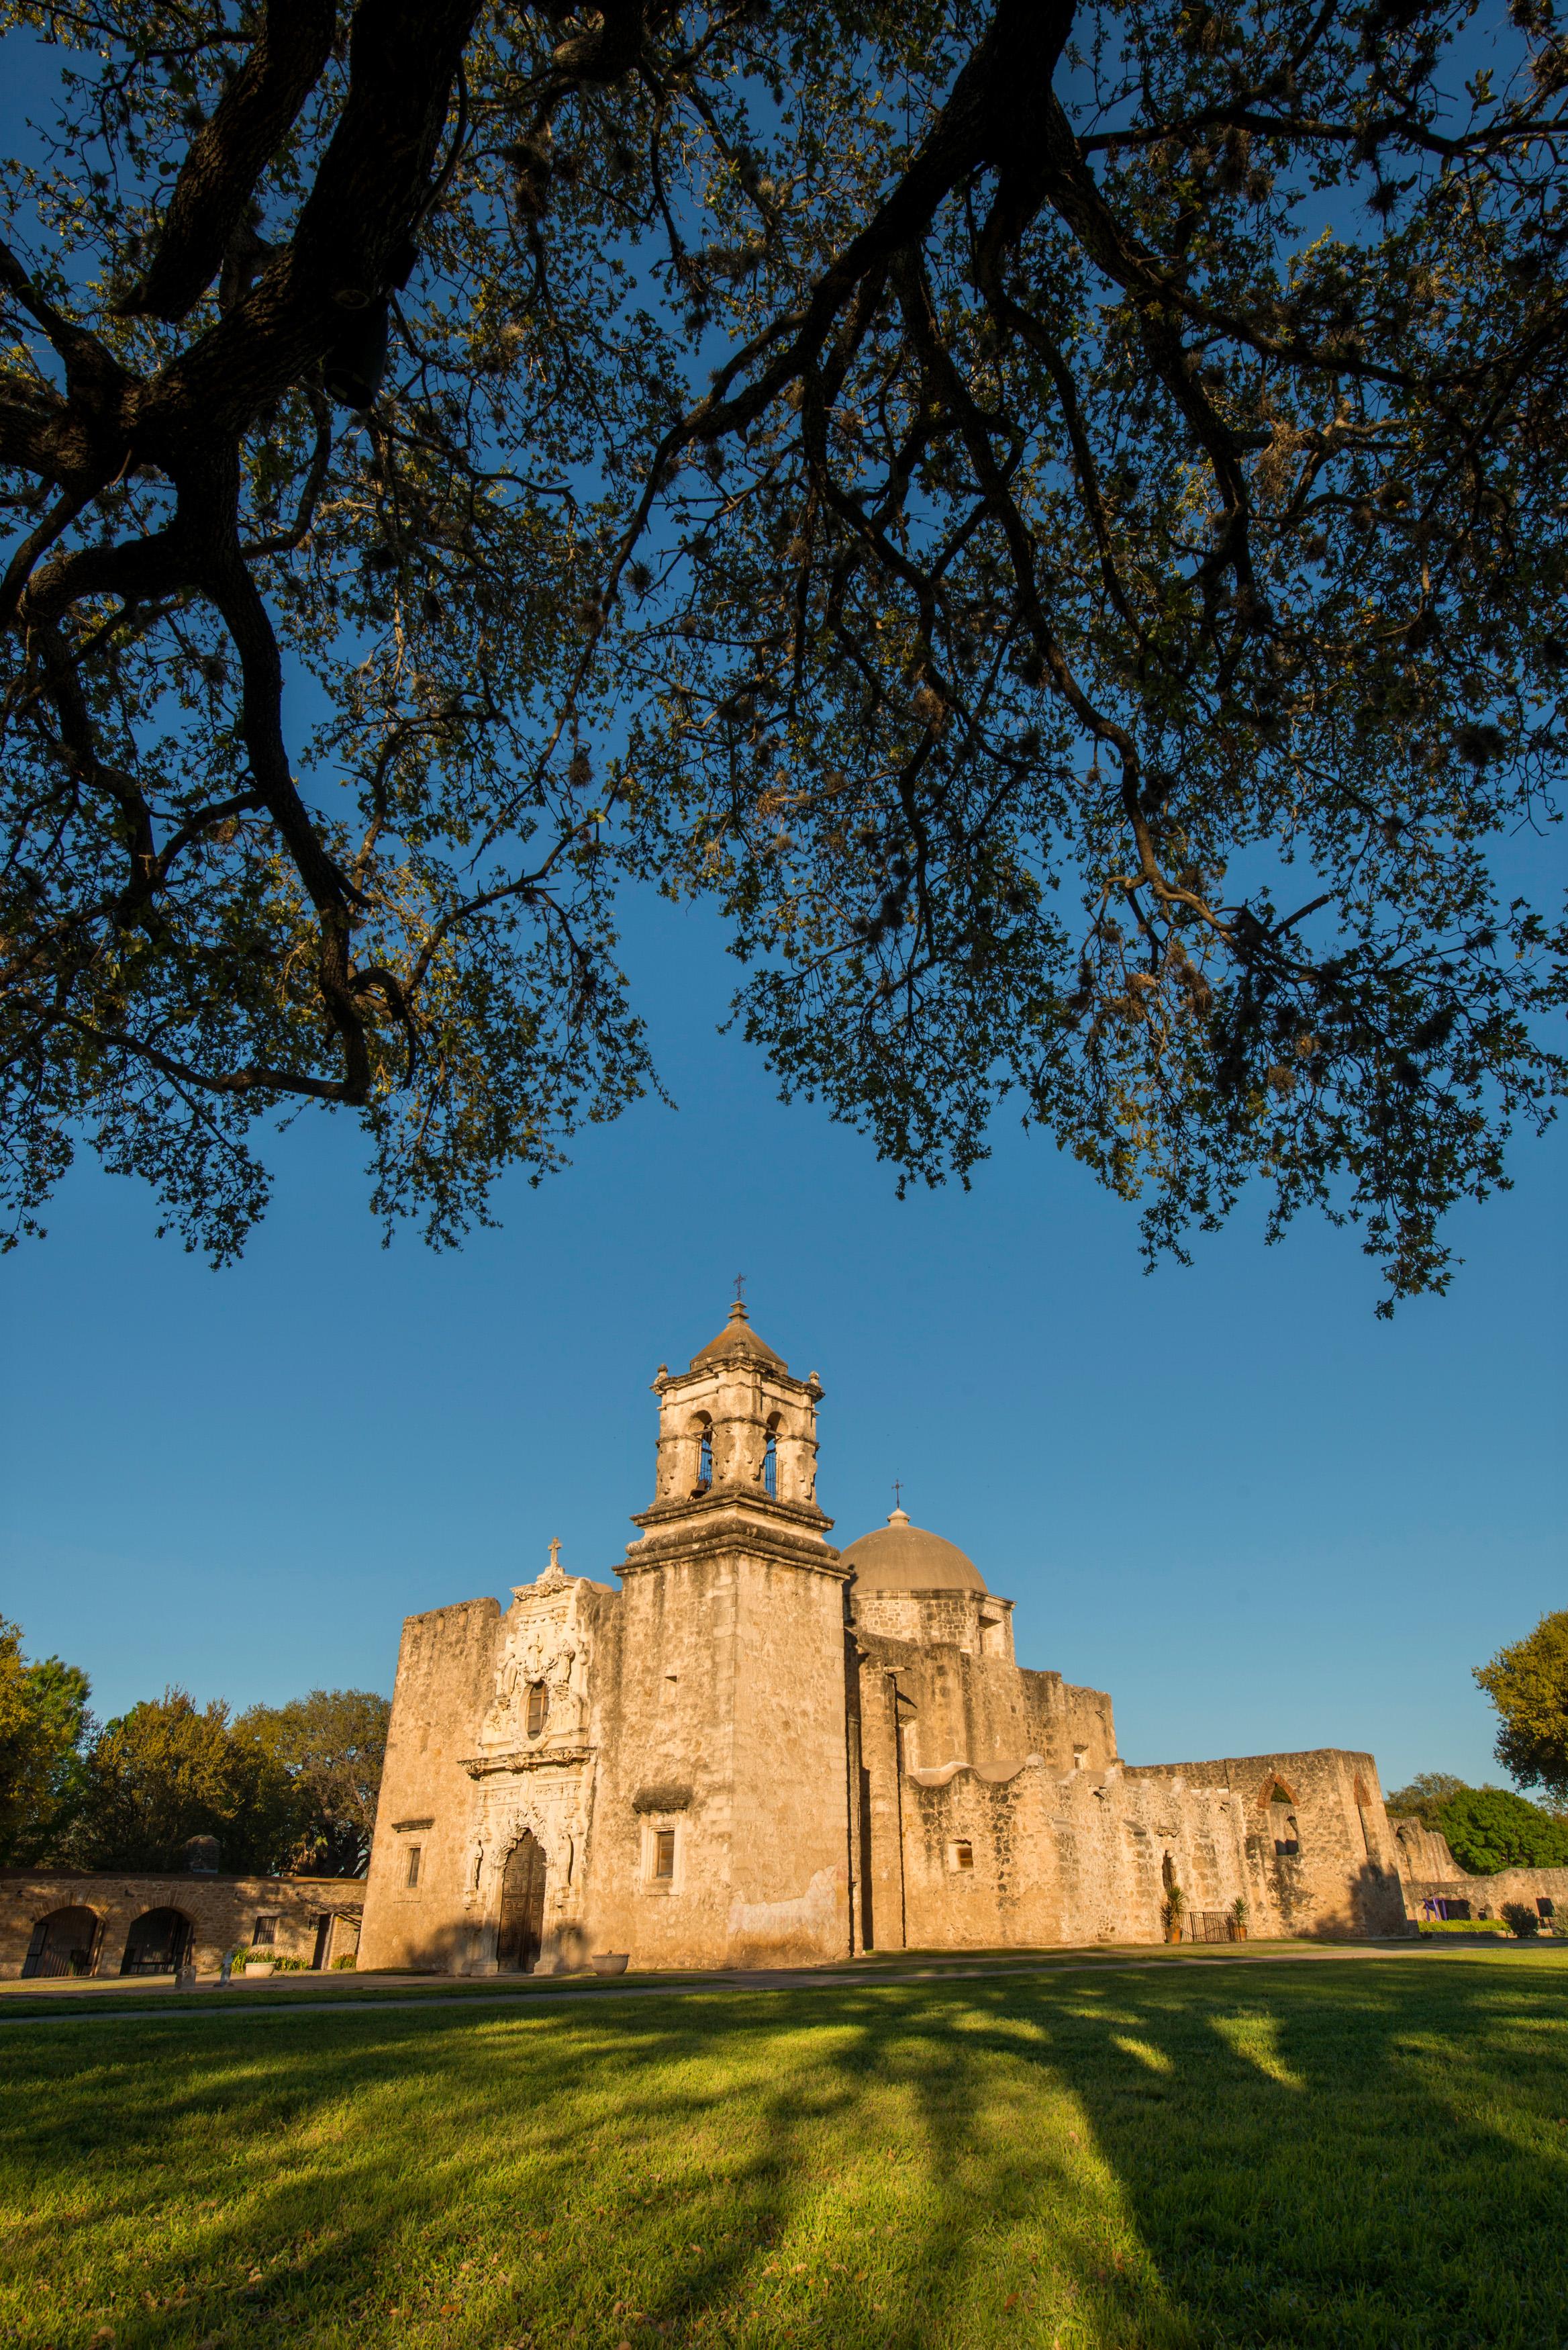 Mission San Jose church and convento during the golden hour with tree